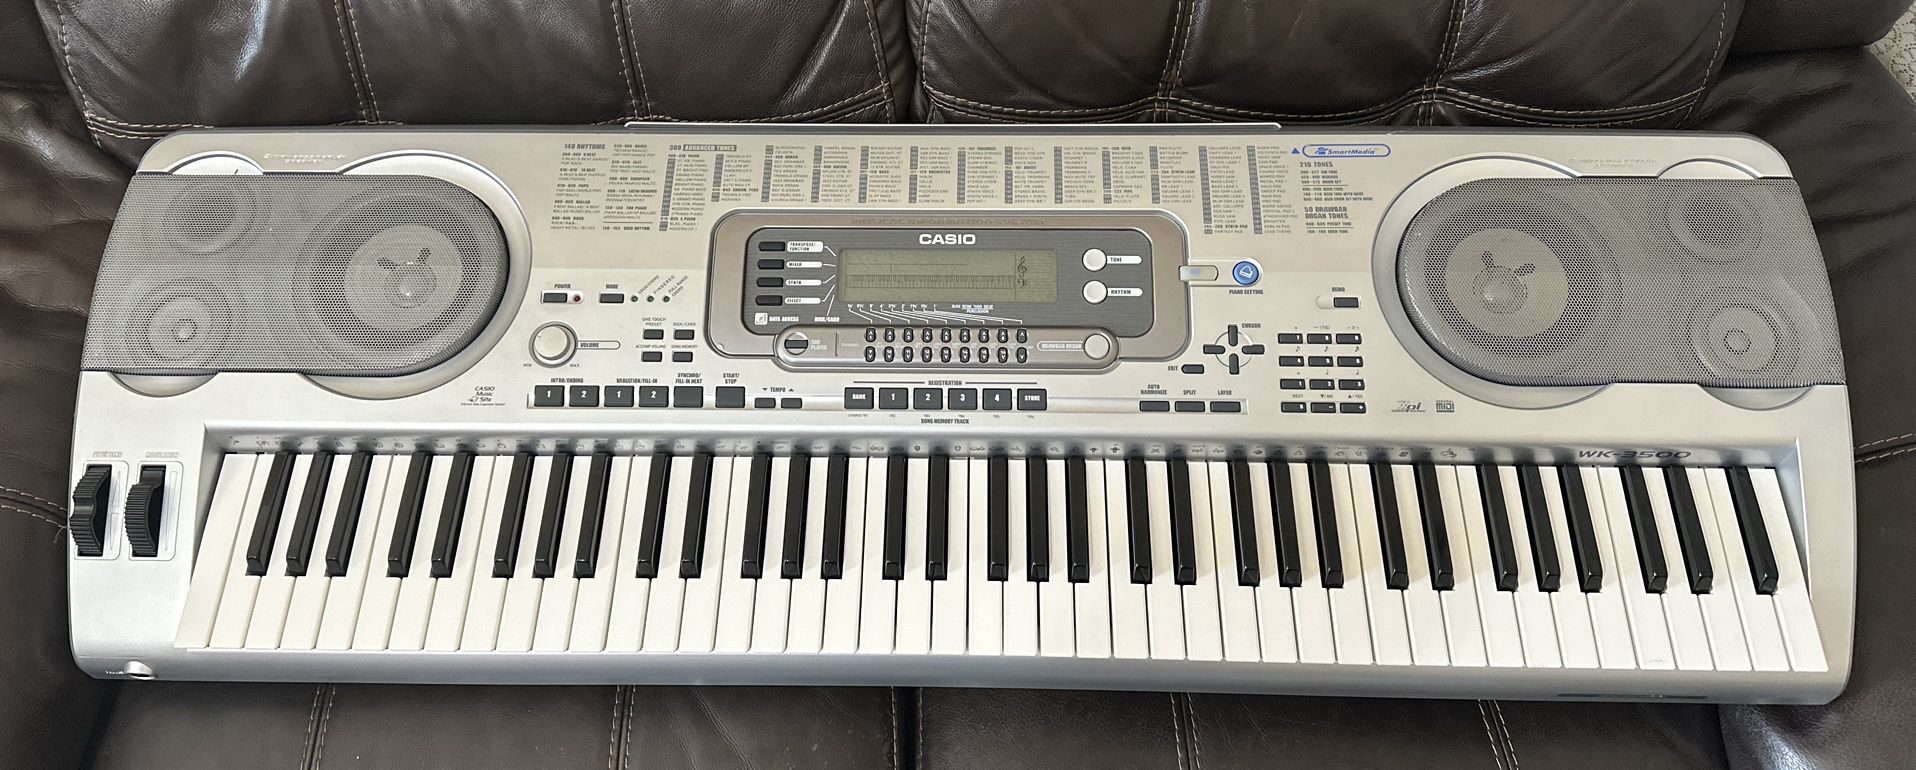 Piano Casio WK-3500 Keyboard 76 Full Size Keys and Pro Quality Touch Sensitive Response. $250 OBO